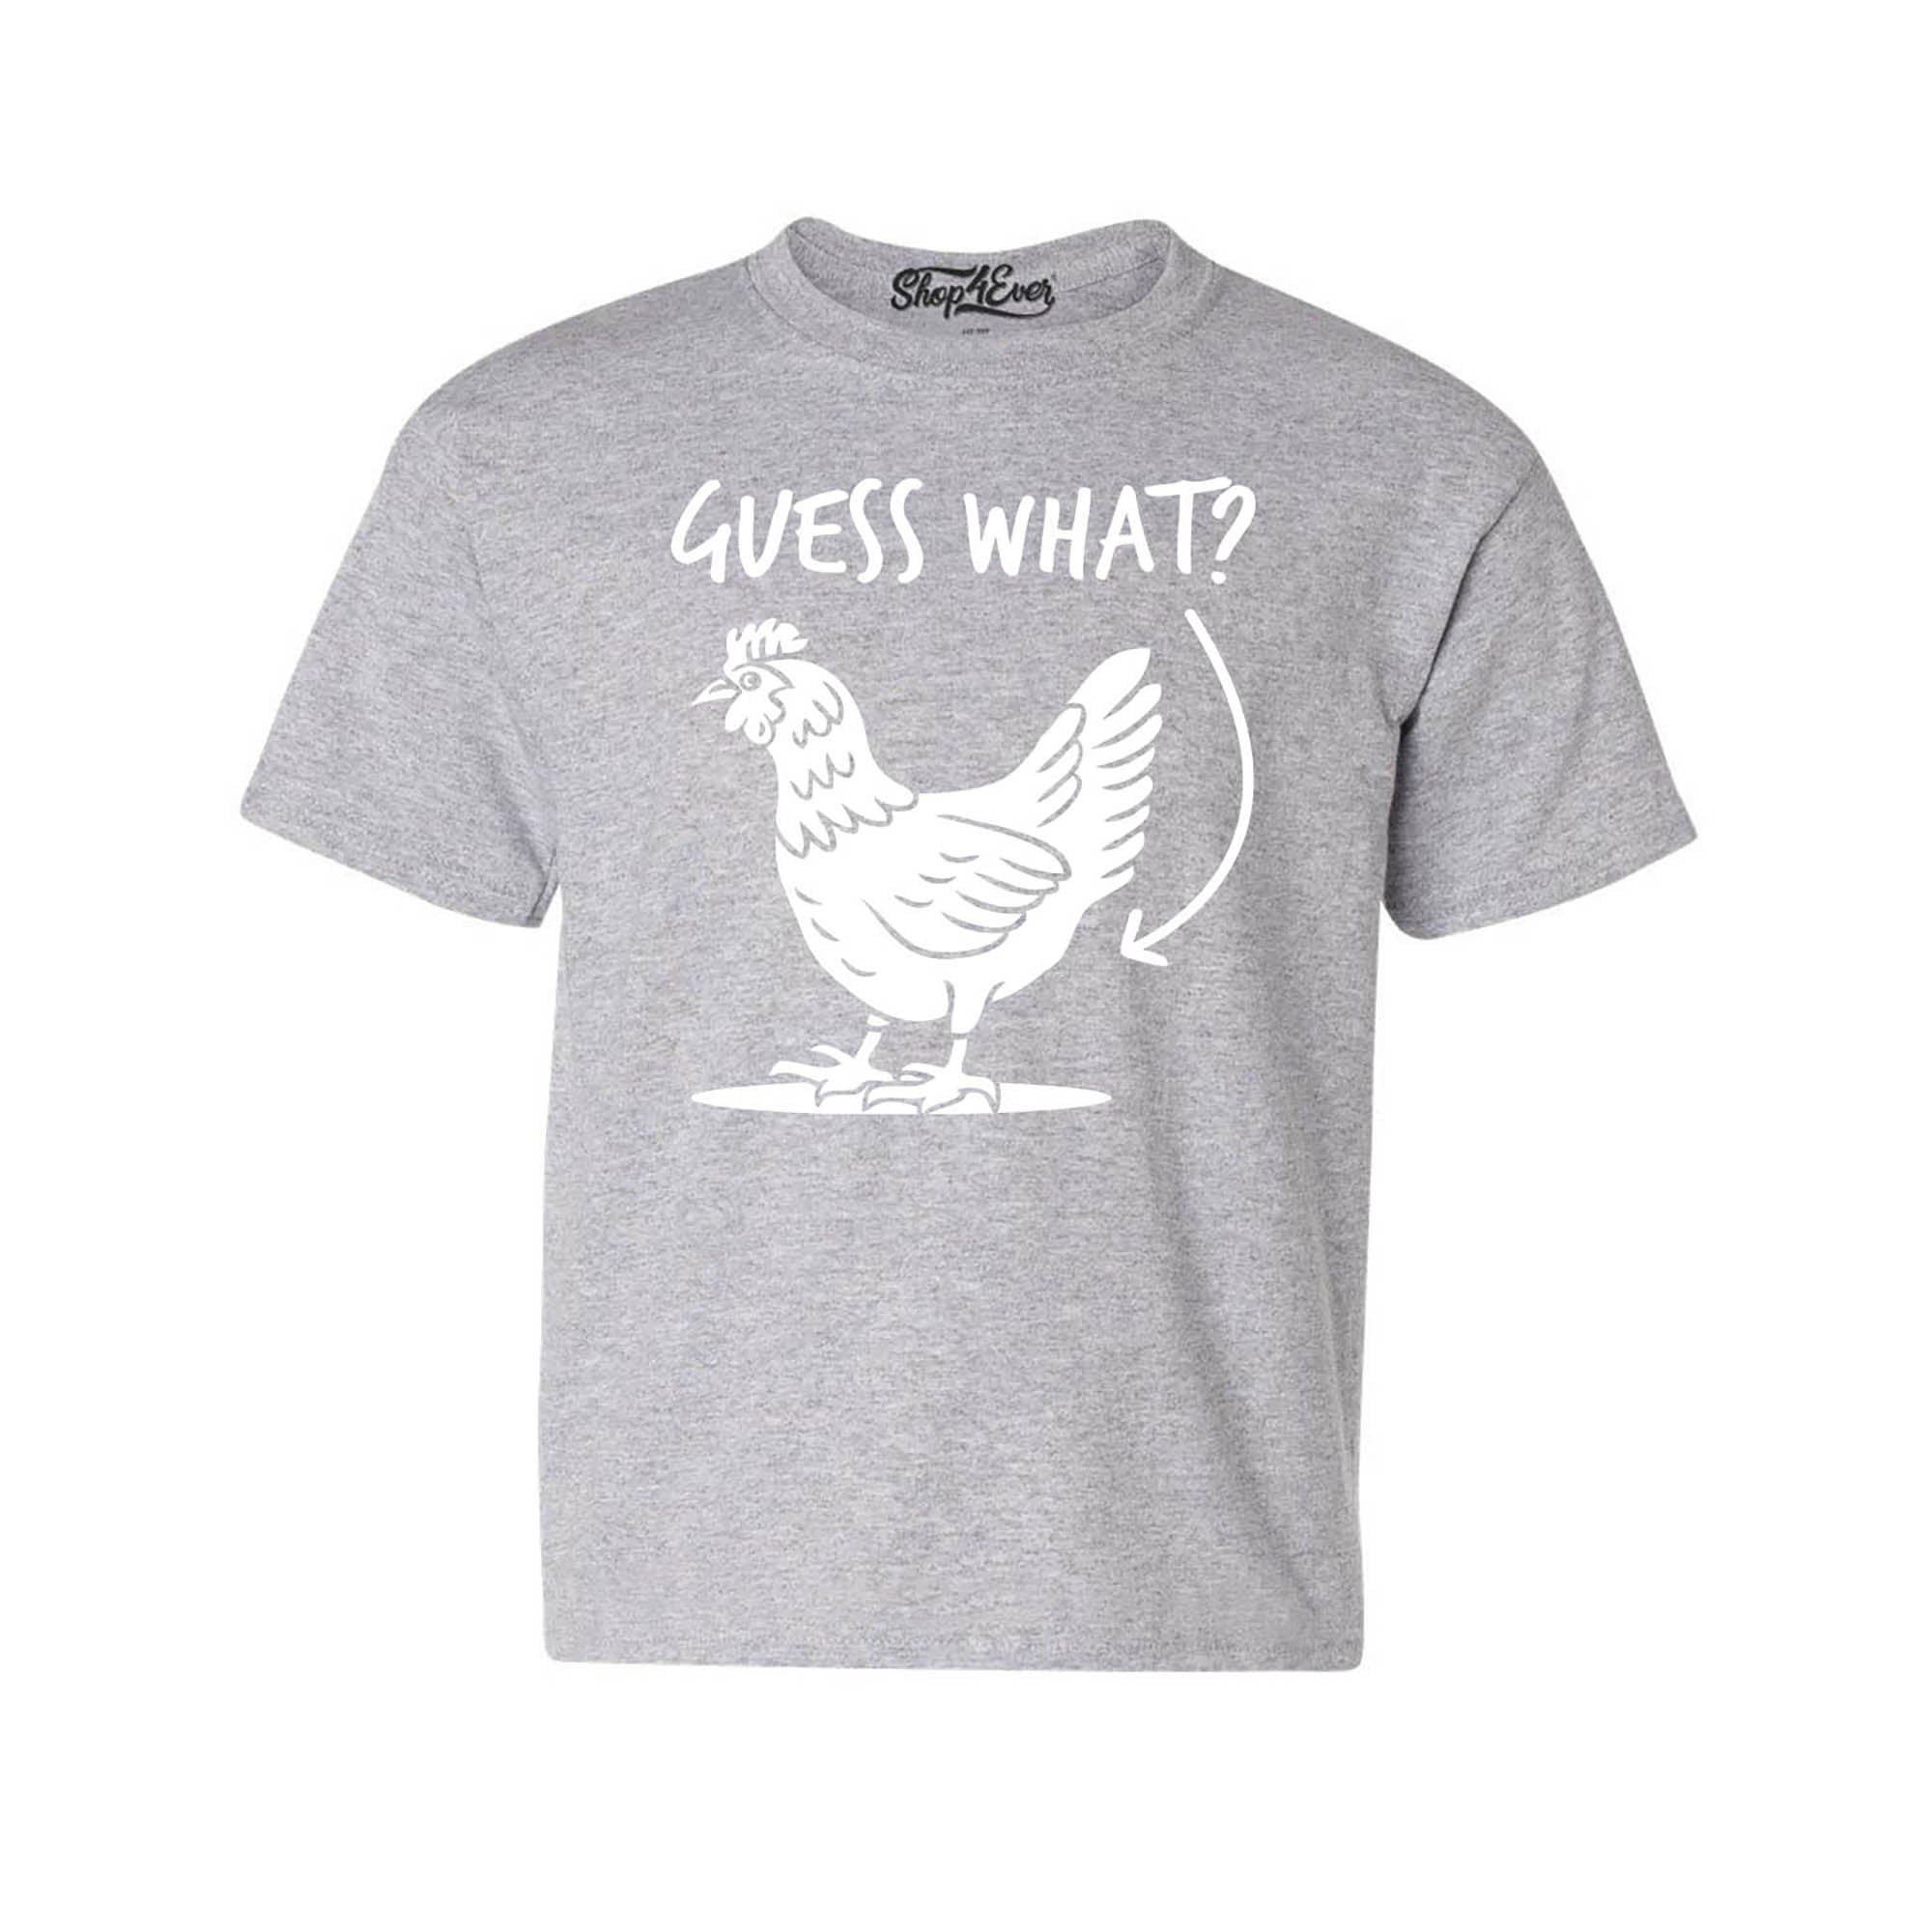 Guess What? Chicken Butt Kids Child Funny Youth's T-Shirt